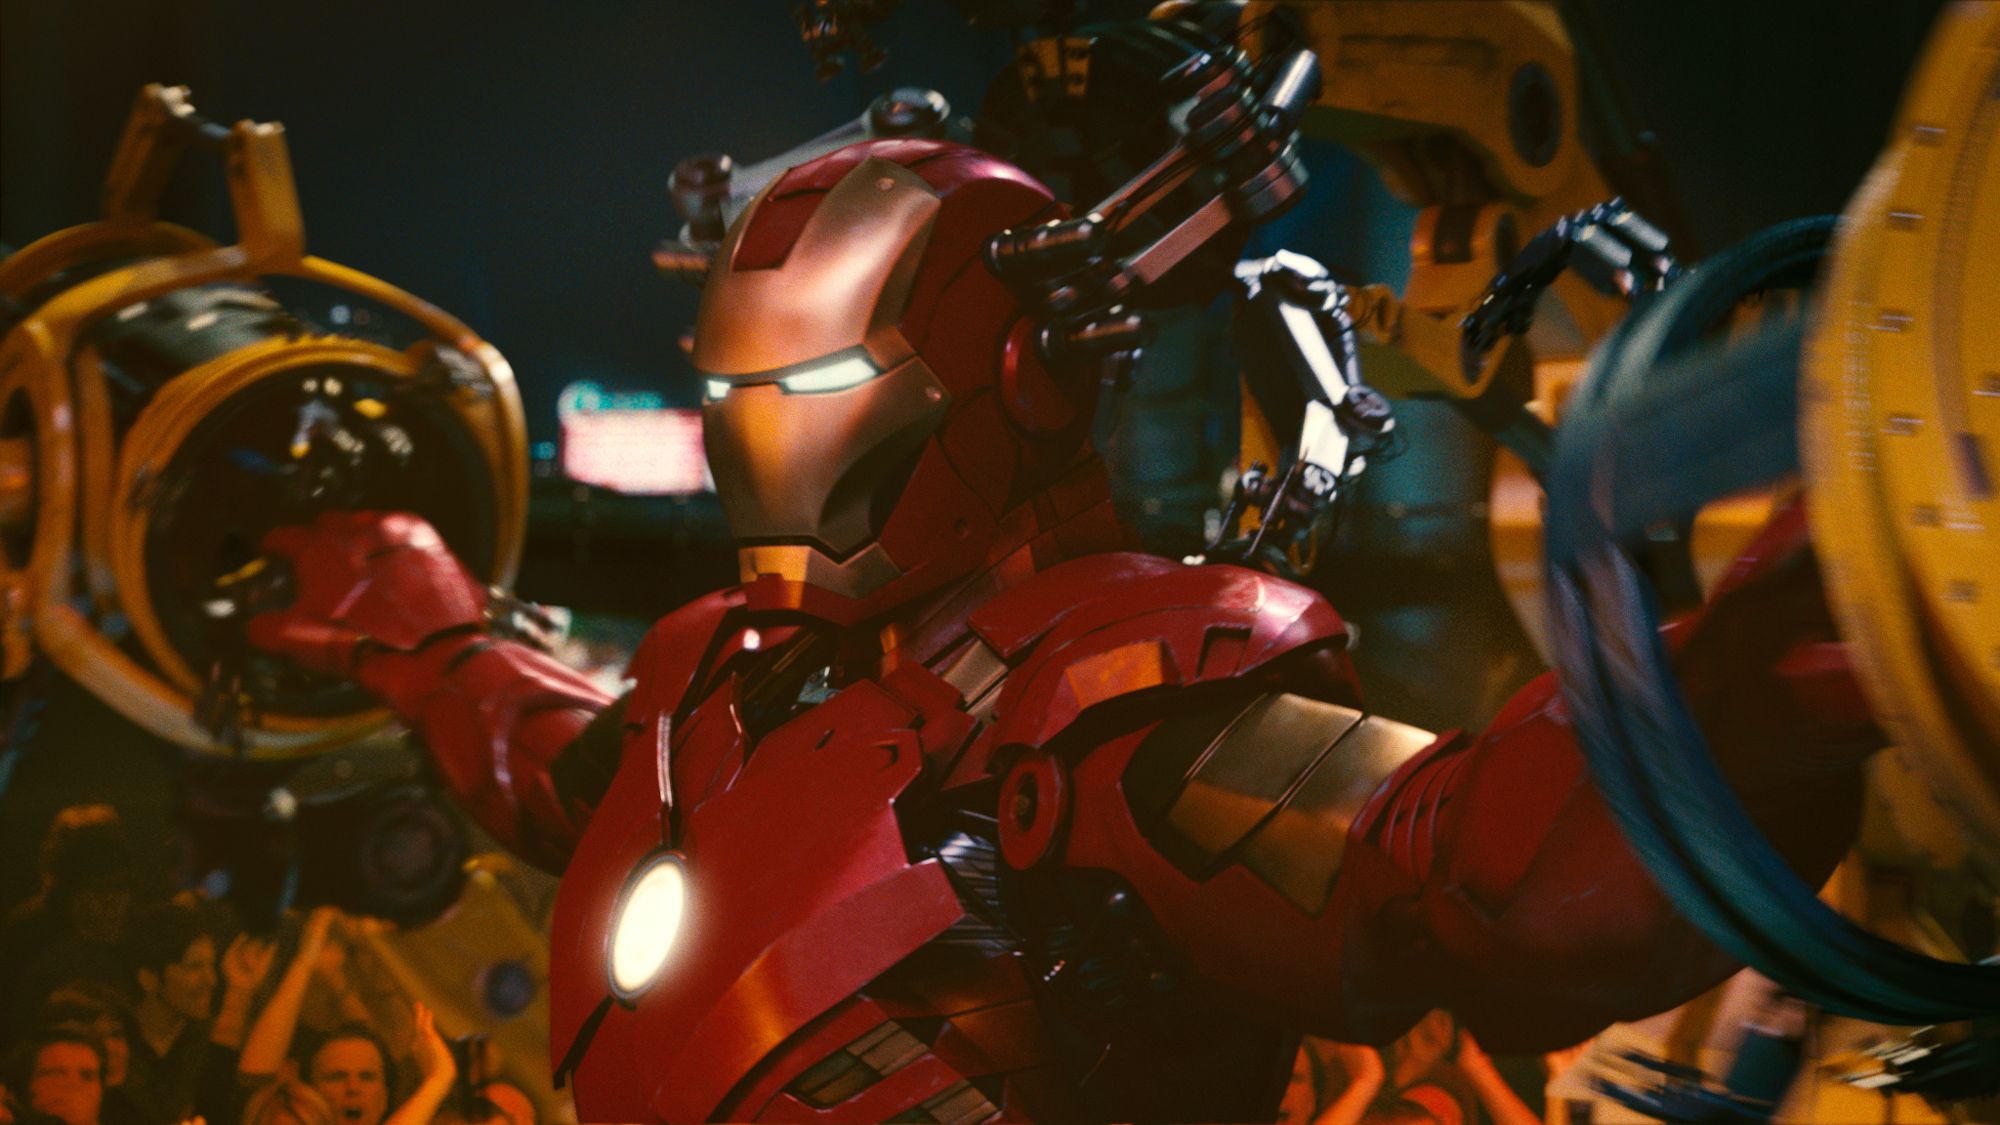 Two New Iron Man 2 TV Spots Show Brief Glimpses of Action